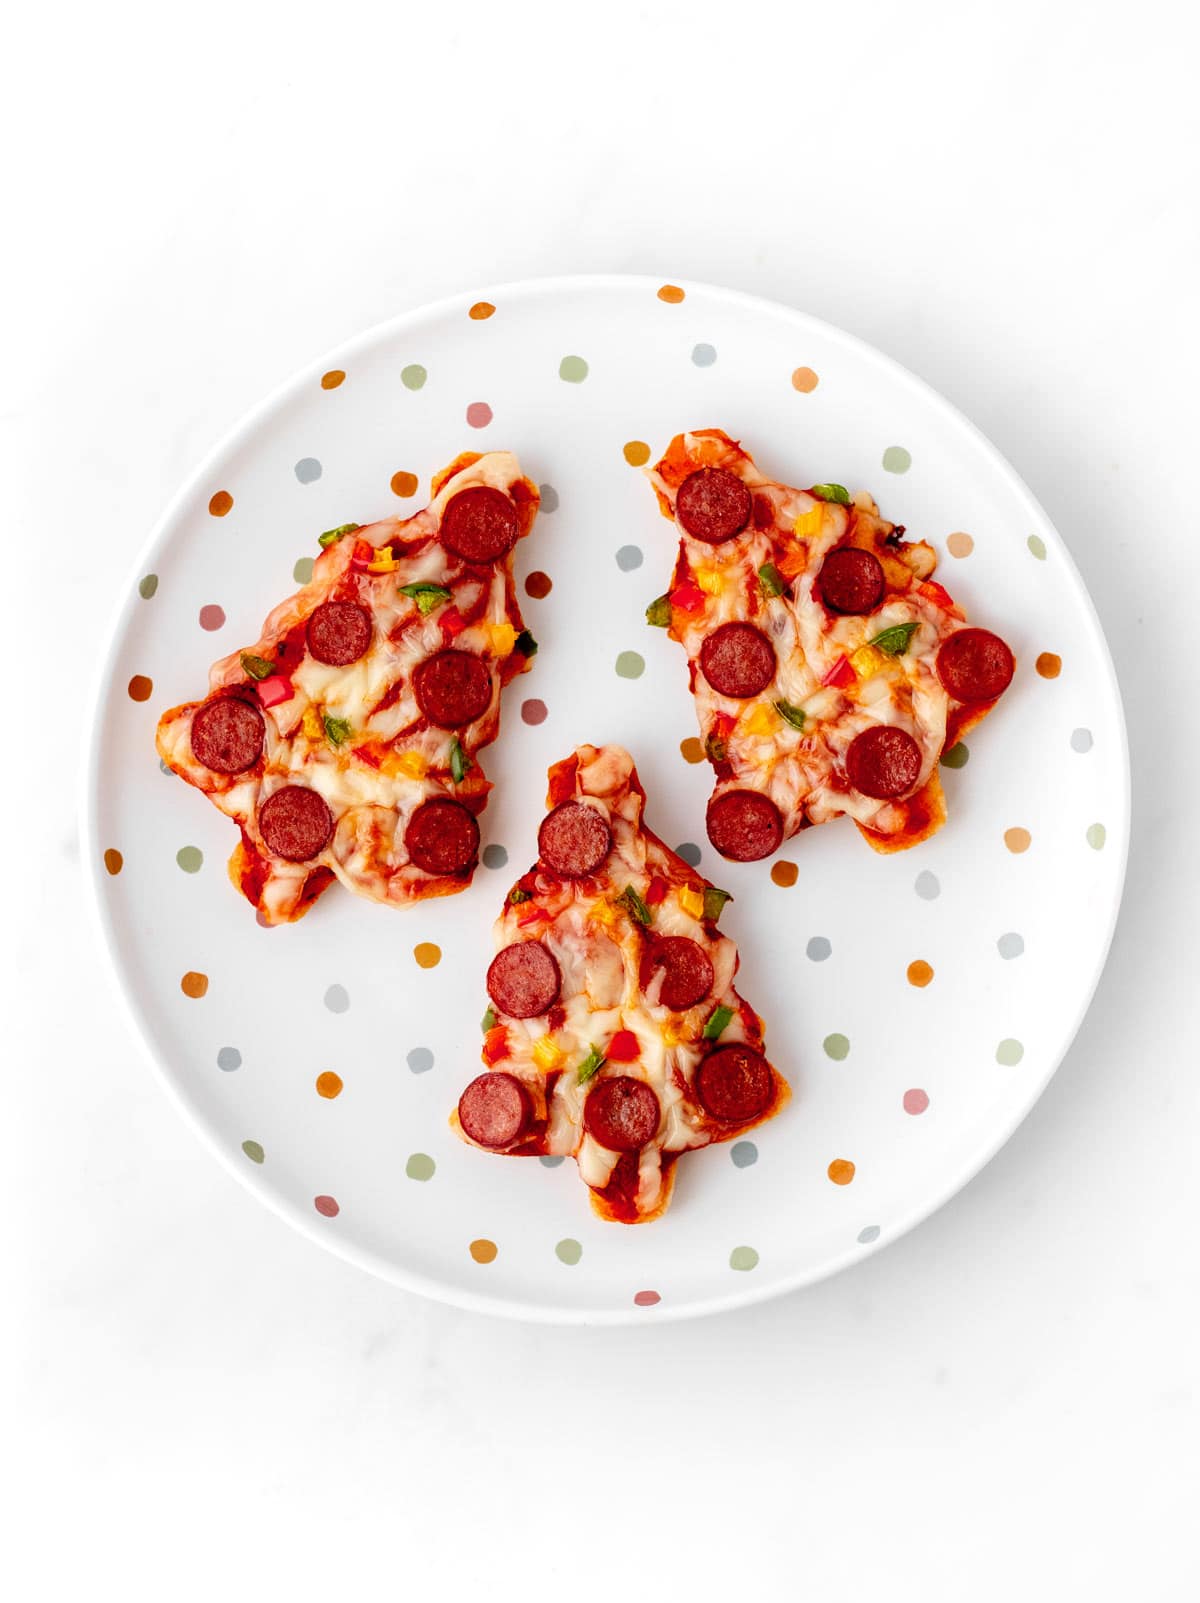 A birds-eye view of three mini Christmas tree pizzas on a decorative plate.